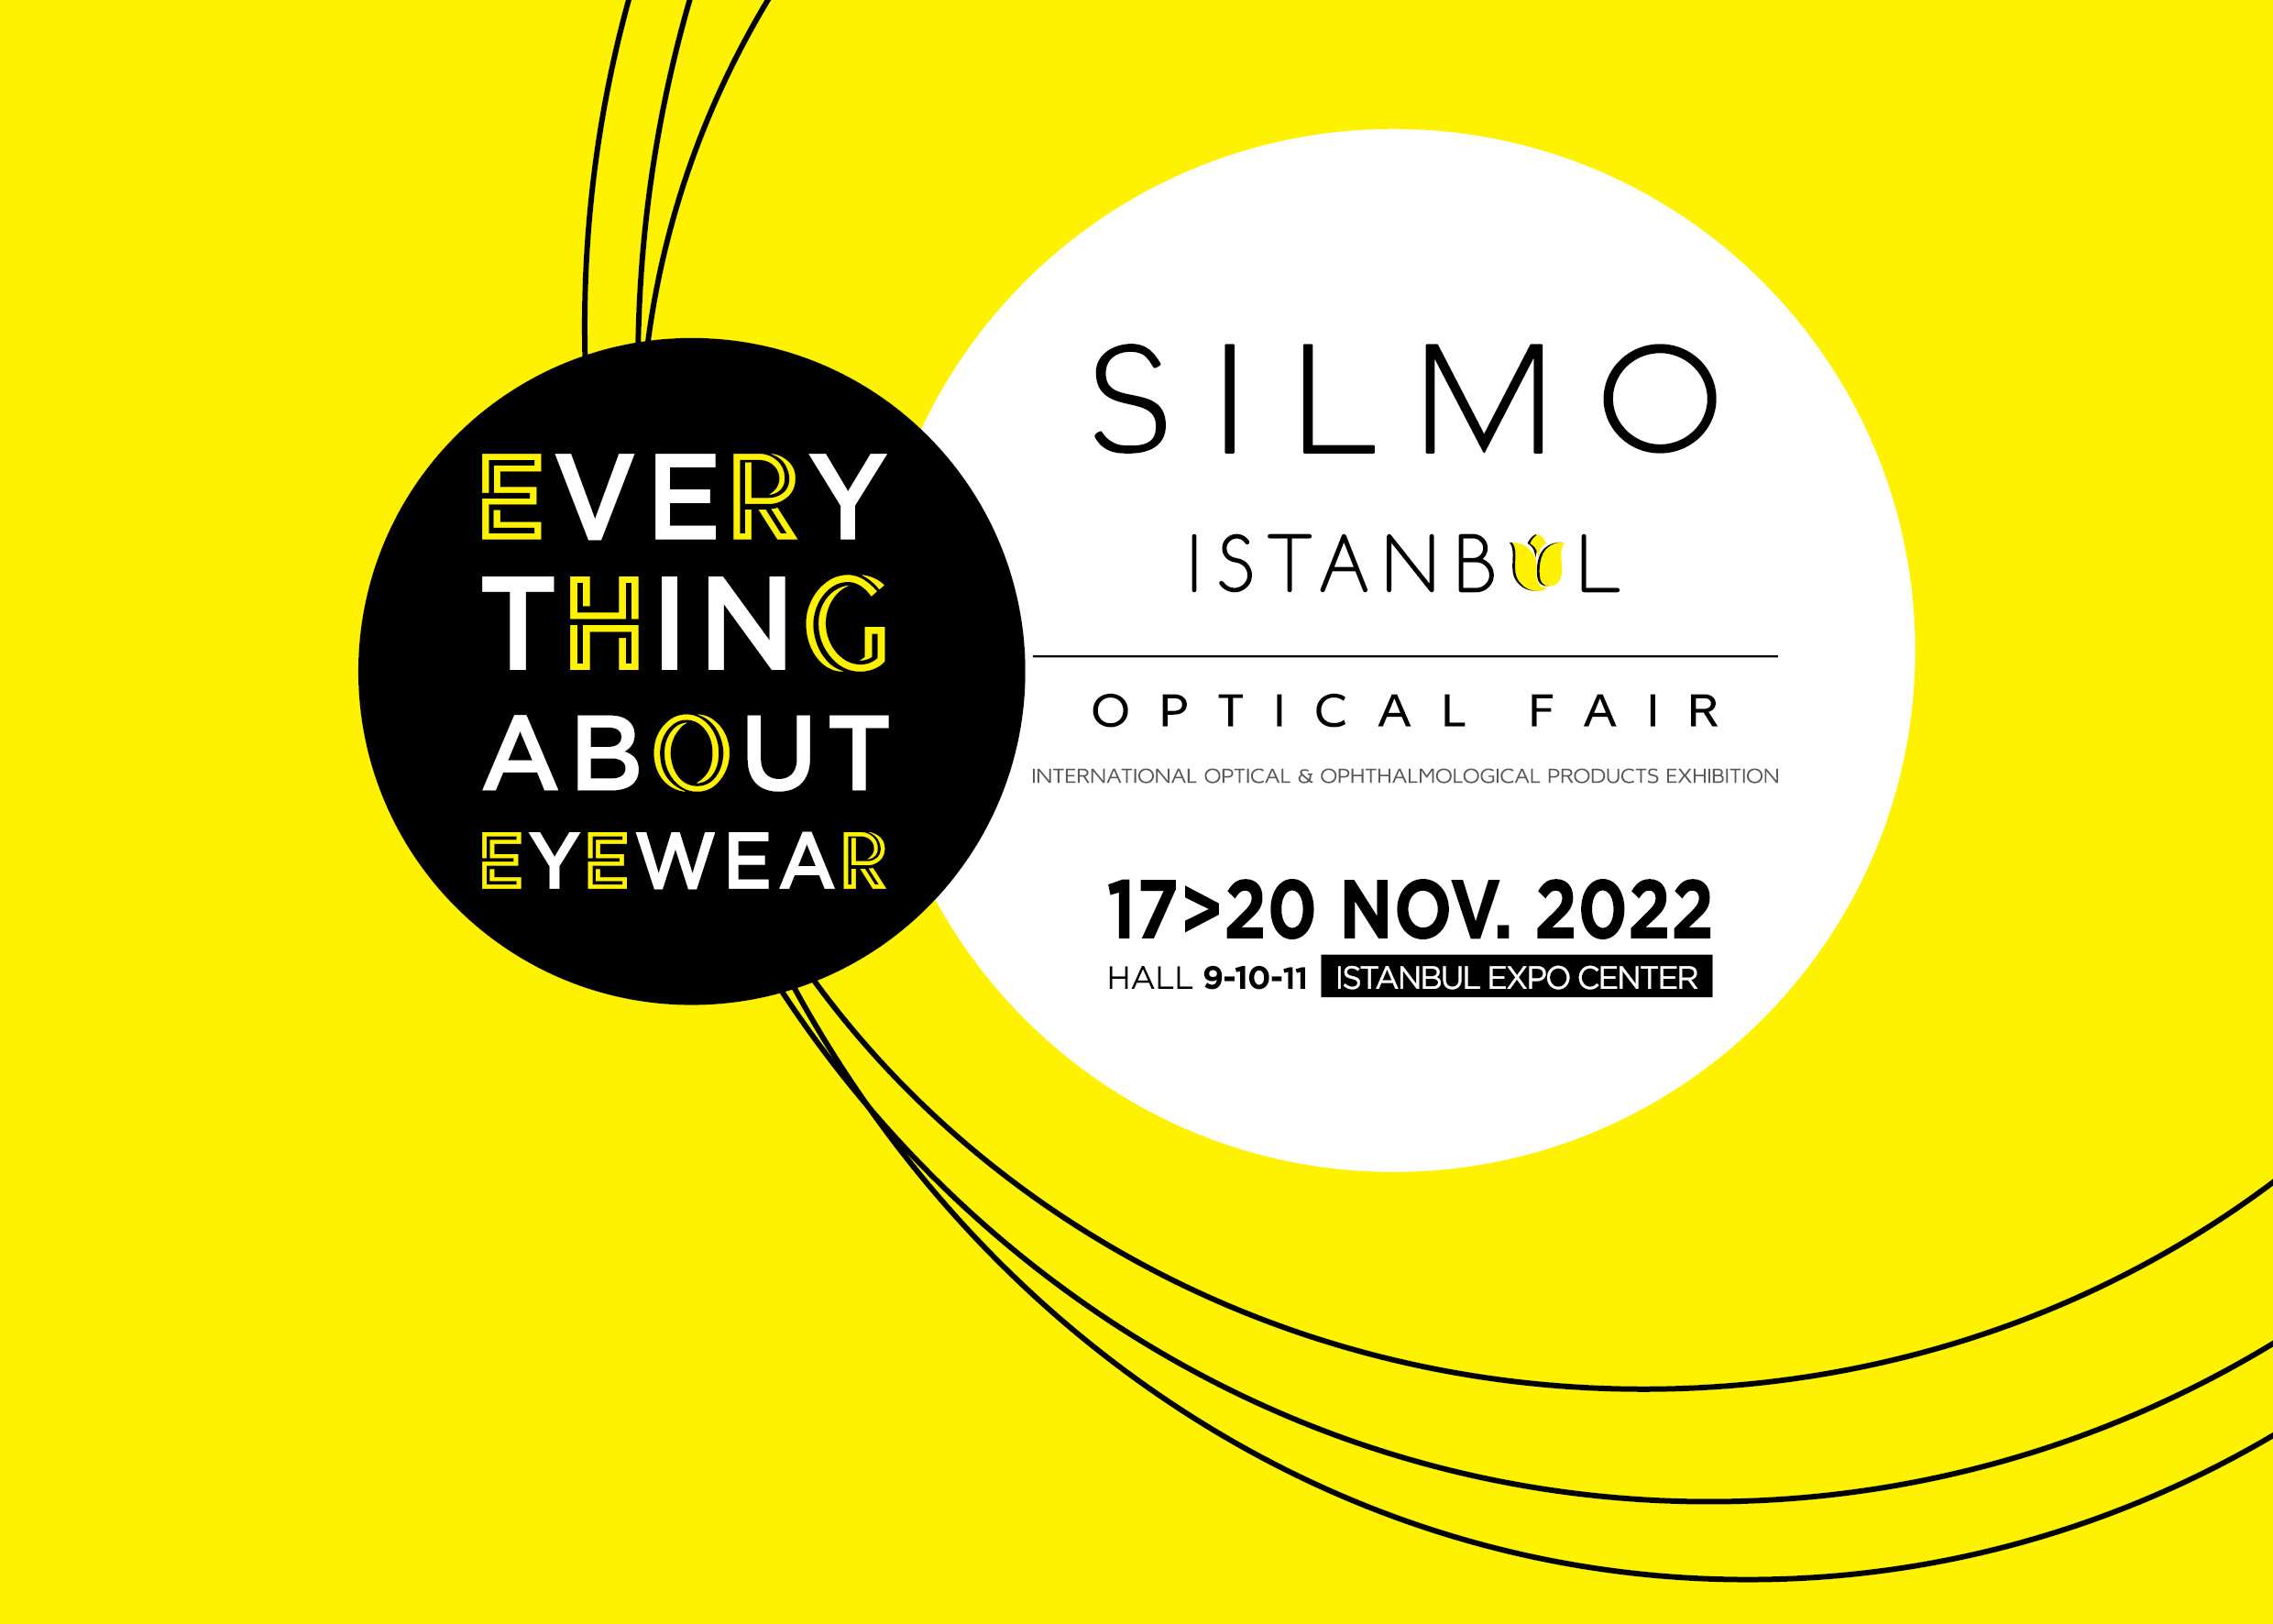 “EVERYTHING ABOUT EYEWEAR” WITH SILMO ISTANBUL